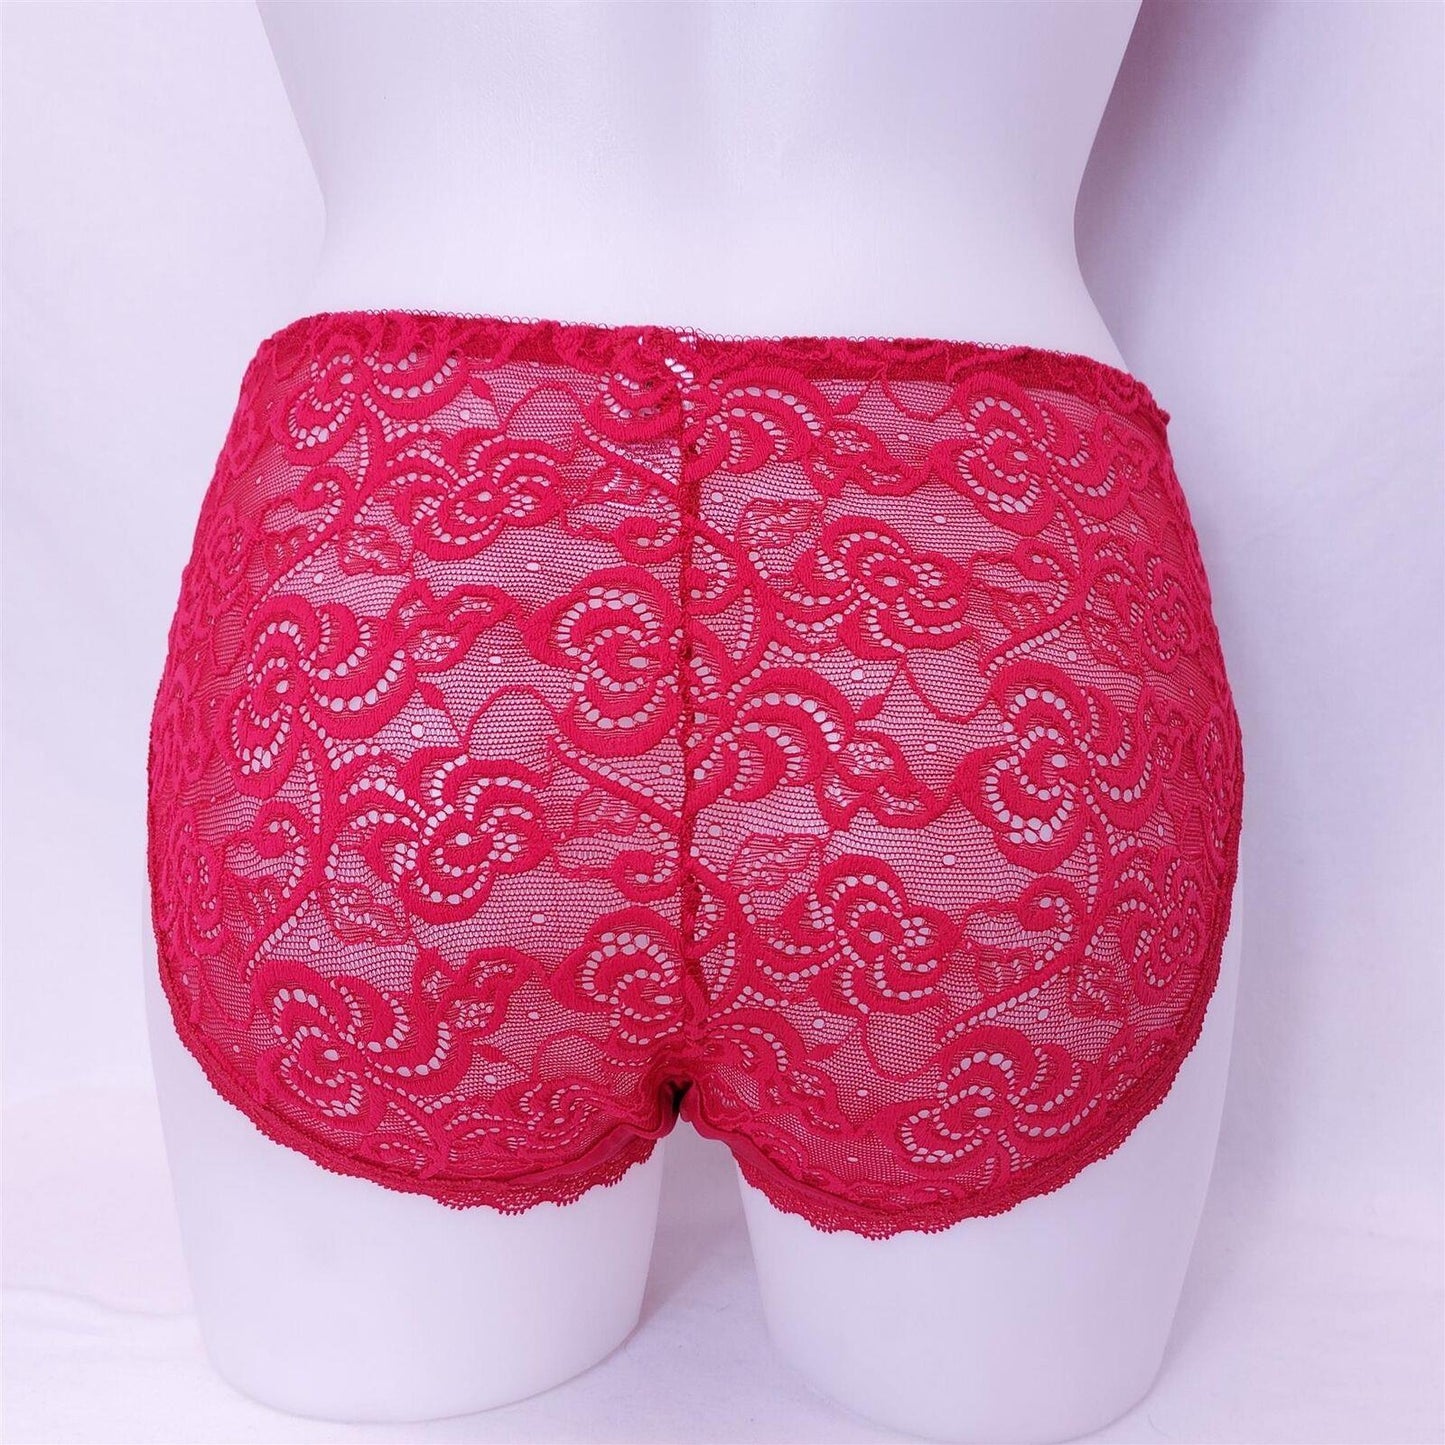 2-Pack Berlei Lace Brief Knickers Comfort Heaven Brand New Passion Red Multipack